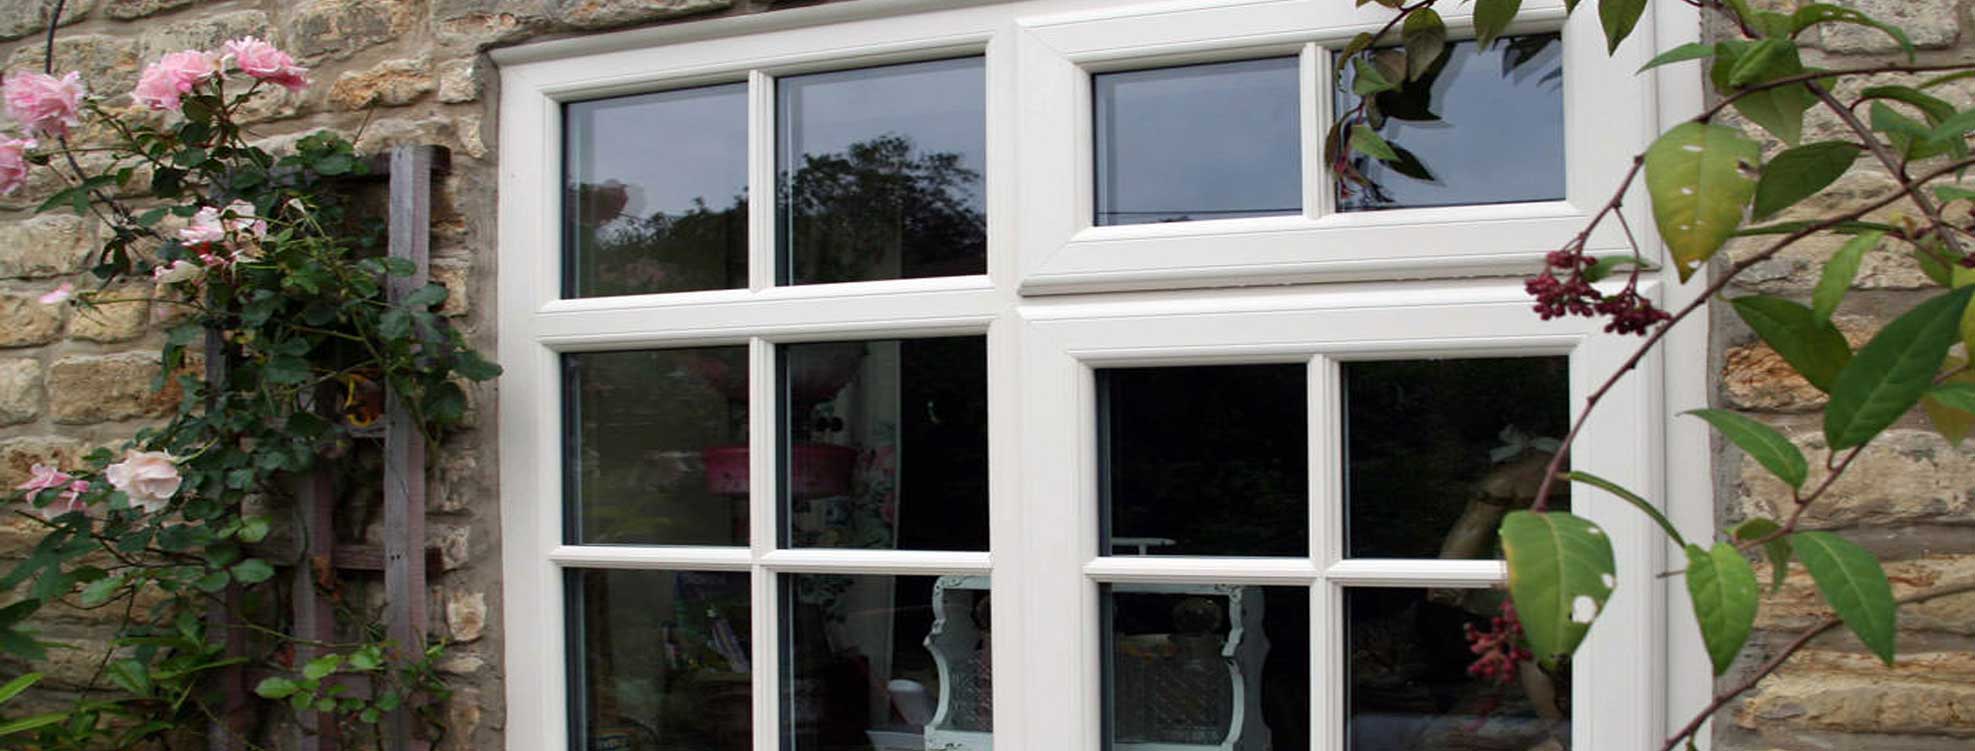 double glazing windows in gainsborough home